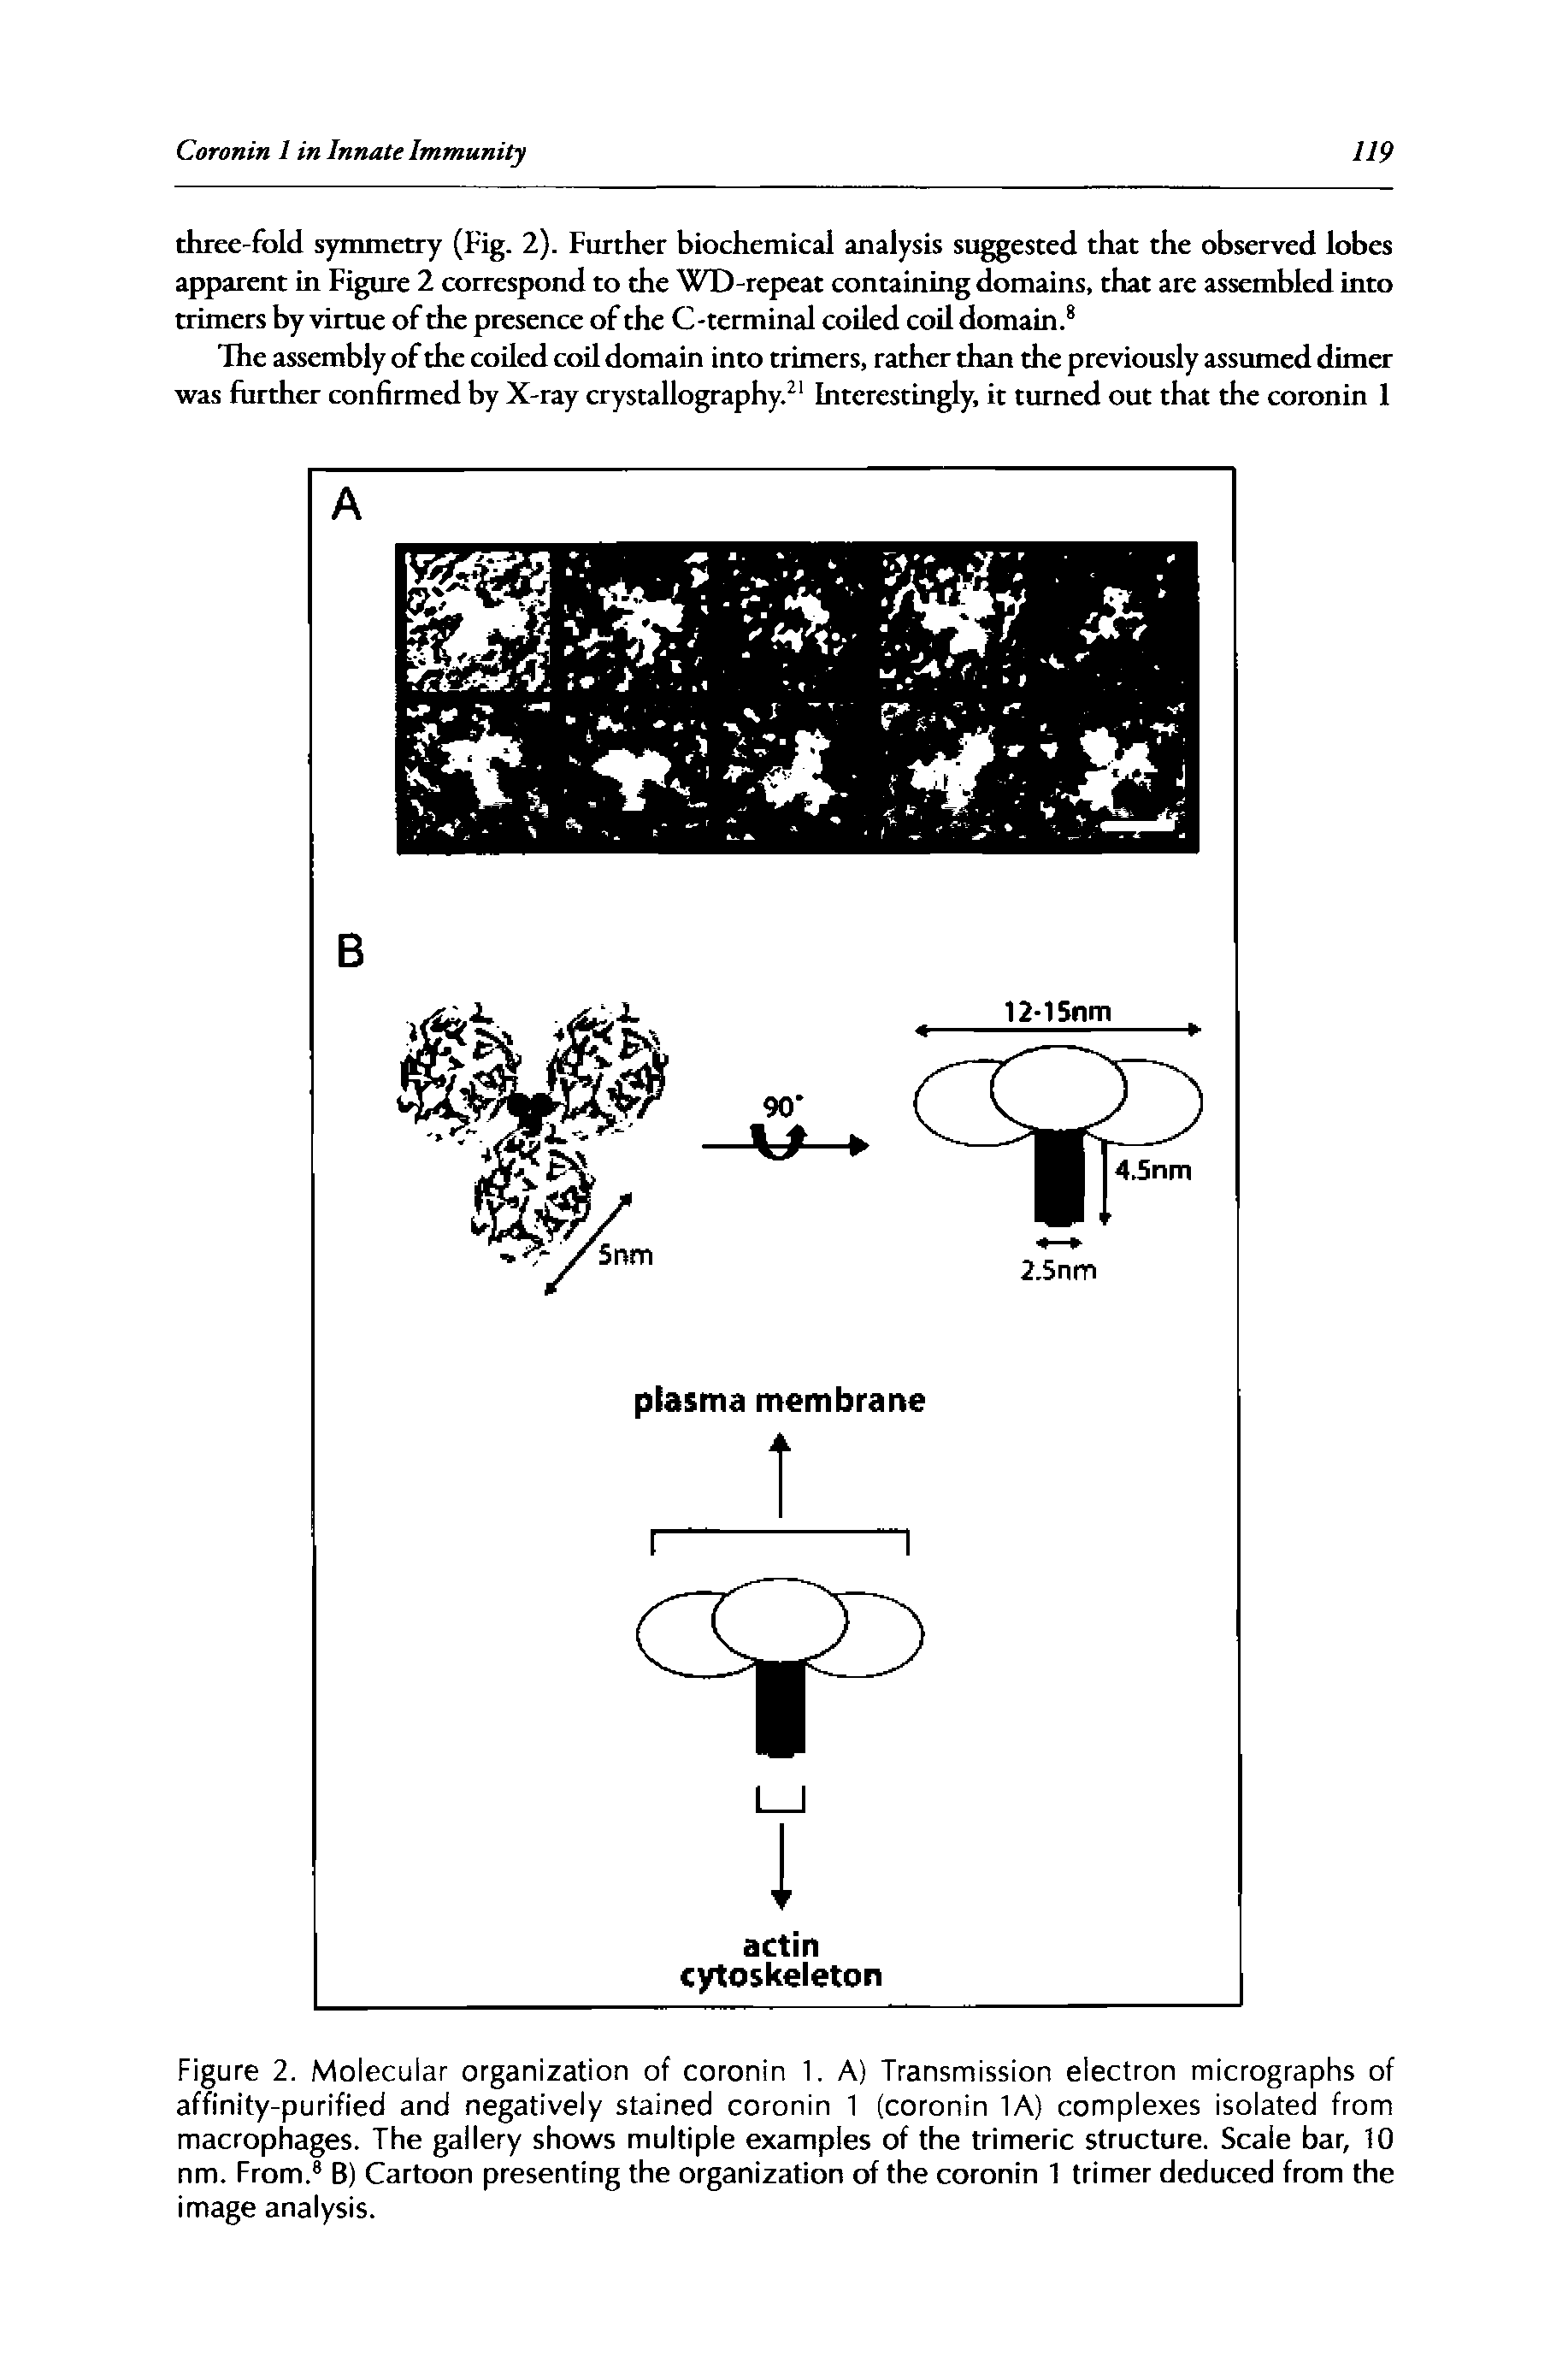 Figure 2. Molecular organization of coronin 1. A) Transmission electron micrographs of affinity-purified and negatively stained coronin 1 (coronin lA) complexes isolated from macrophages. The gallery shows multiple examples of the trimeric structure. Scale bar, 10 nm. From. B) Cartoon presenting the organization of the coronin 1 trimer deduced from the image analysis.